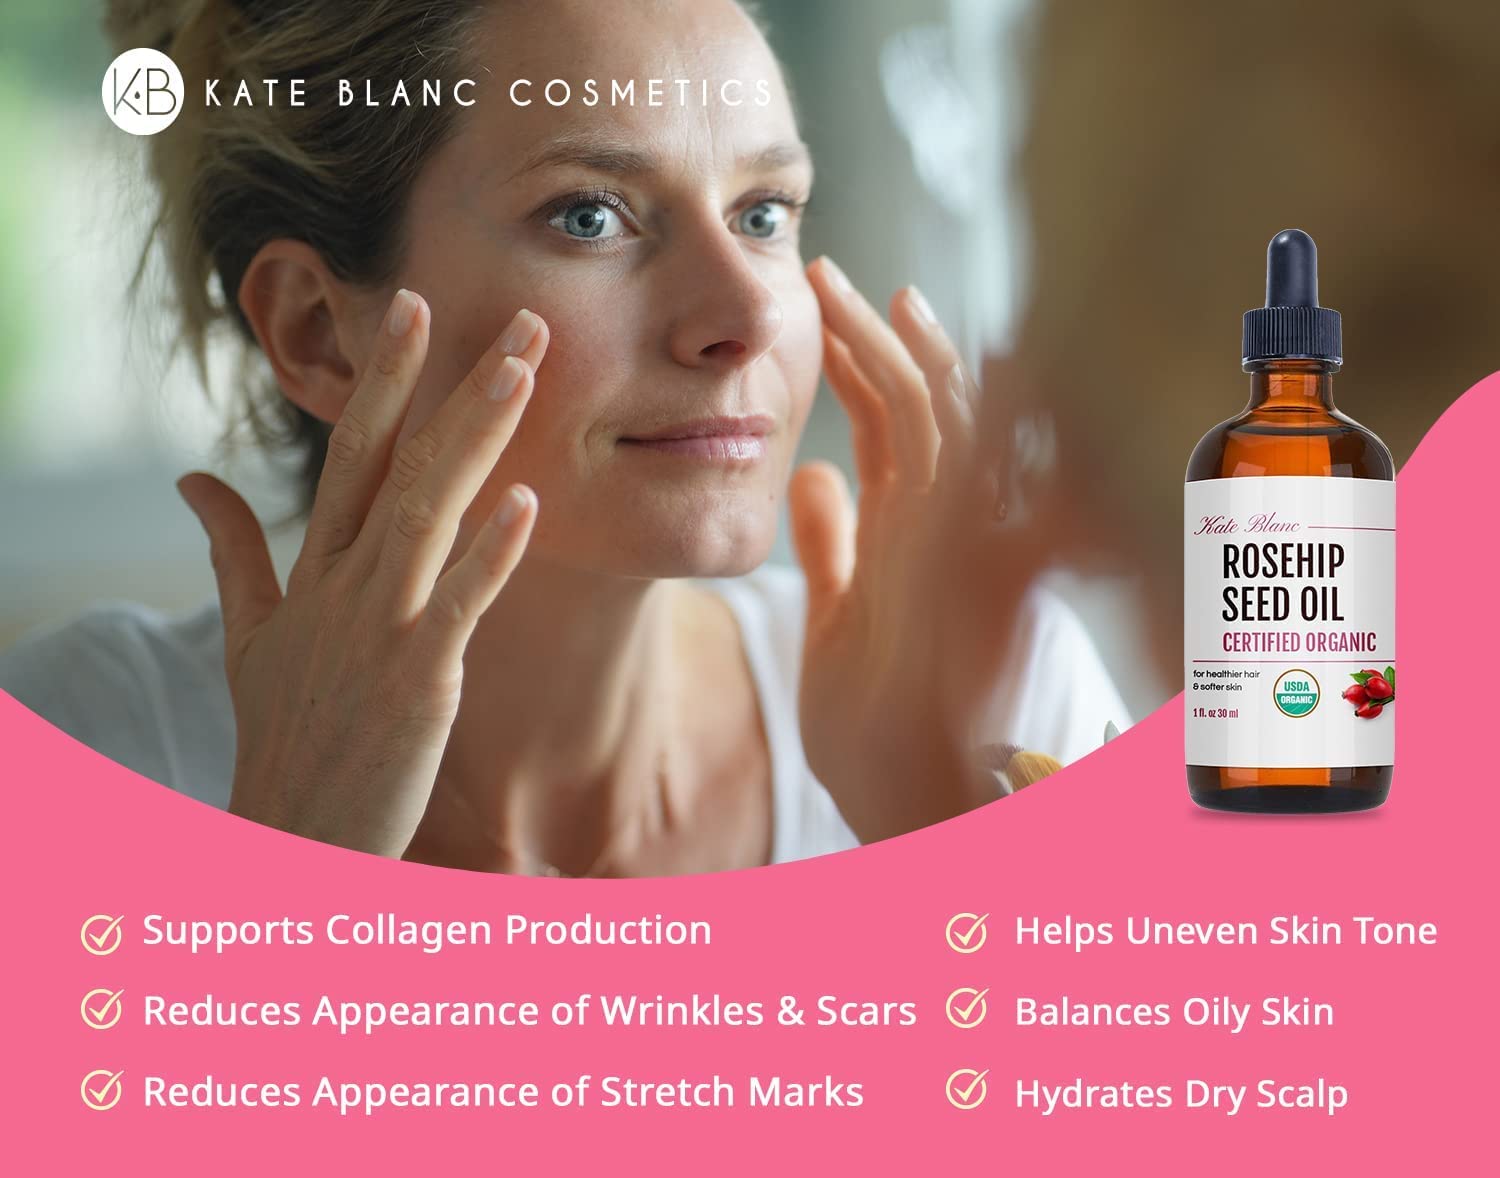 Kate Blanc Cosmetics Rosehip Oil for Face & Skin (1 oz) USDA Organic Rosehip Seed Oil for Gua Sha Massage & Essential Face Oil. 100% Pure, Cold Pressed Rose Hip Oil for Acne Scars & Facial Oil